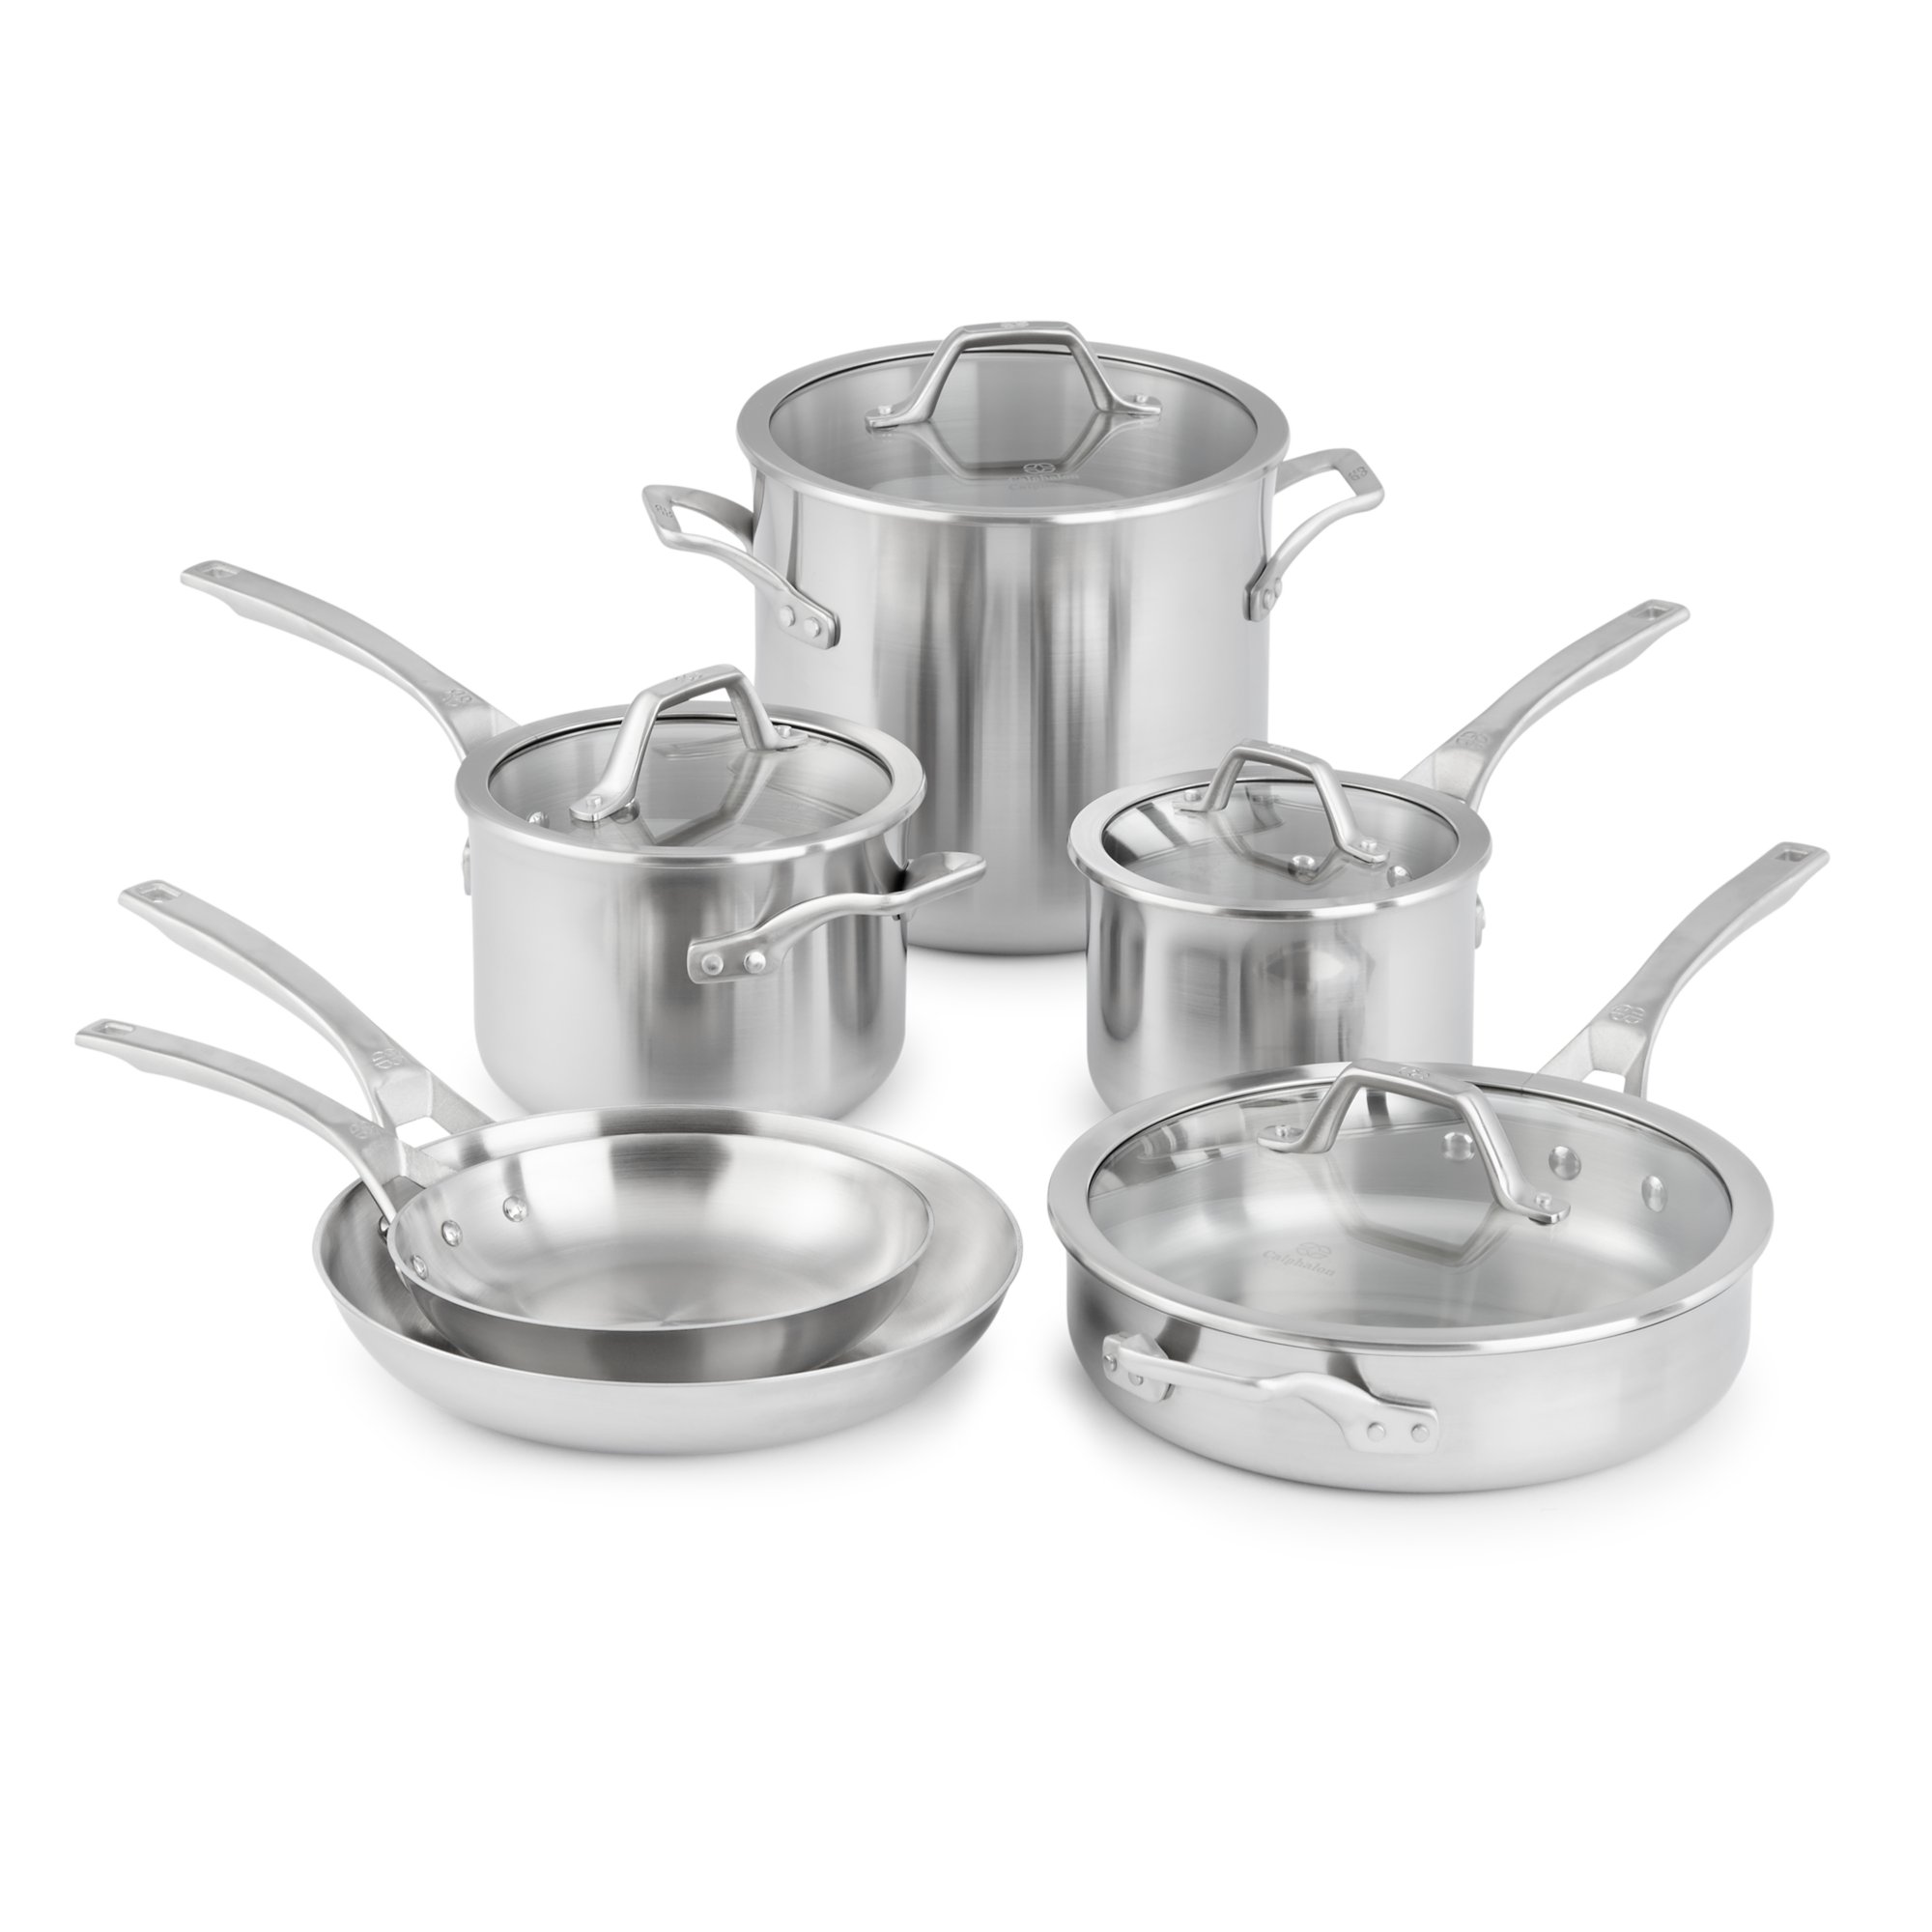 10-Piece Calphalon Signature Stainless Steel 5-Ply Cookware Set Calphalon 5 Ply Stainless Steel